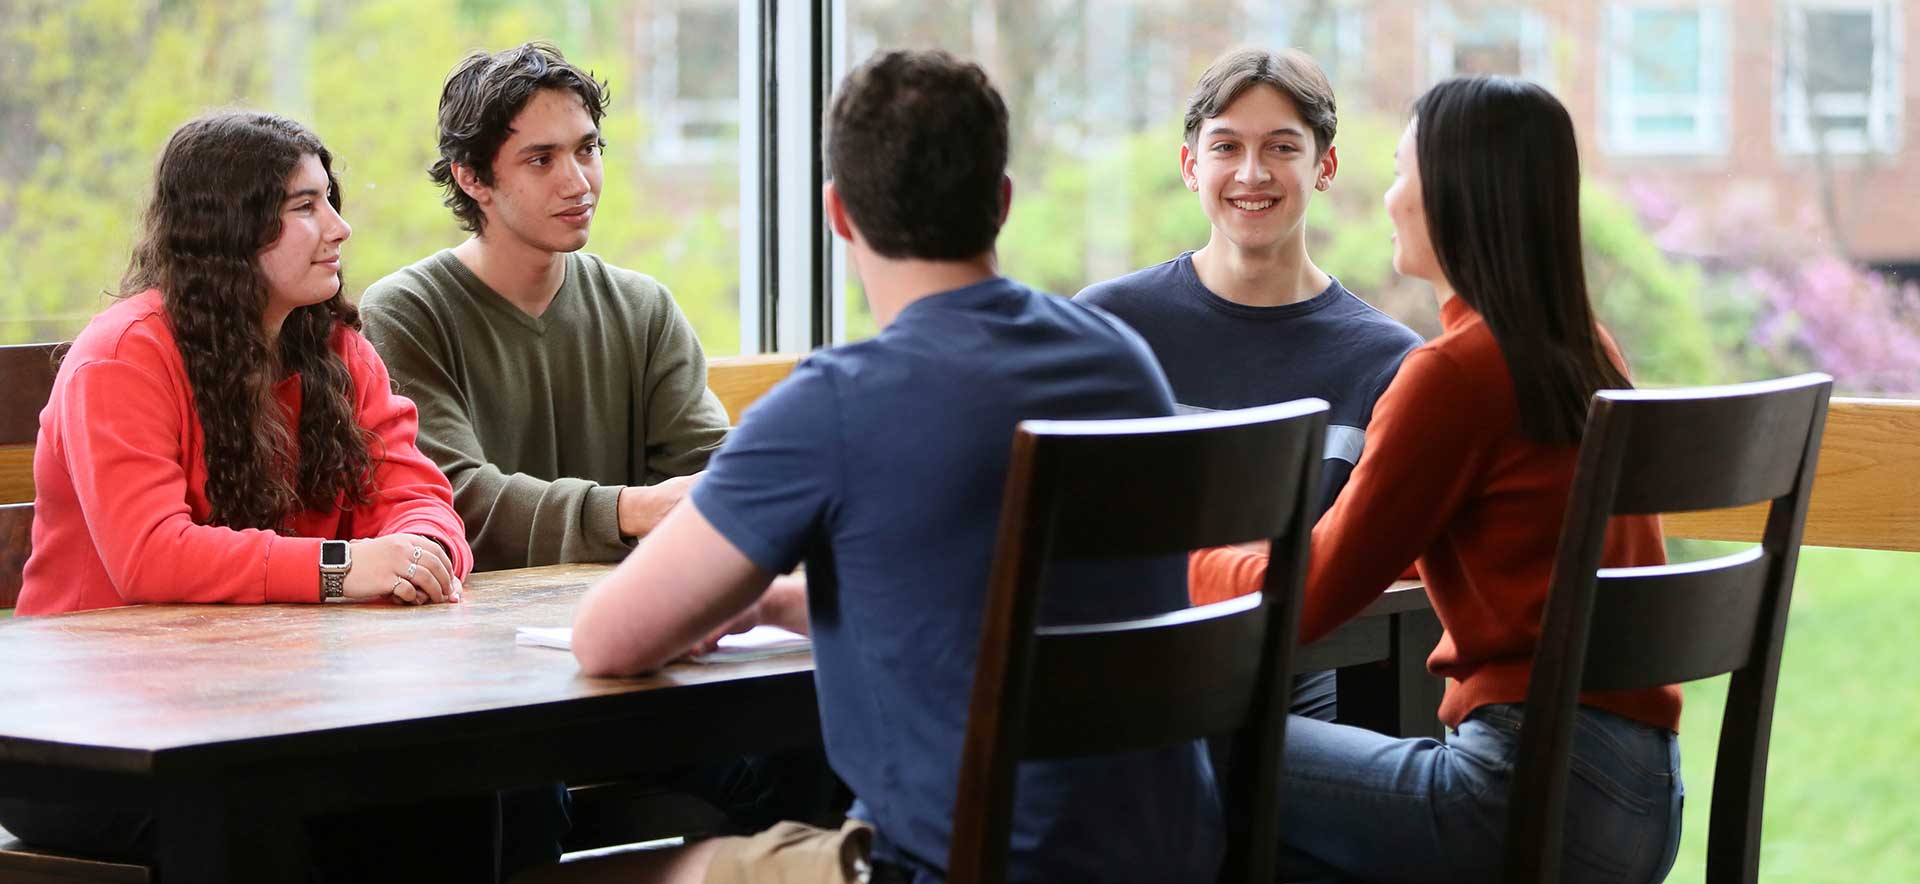 Five students seated at a table in conversation, the Brandeis campus is seen in the background